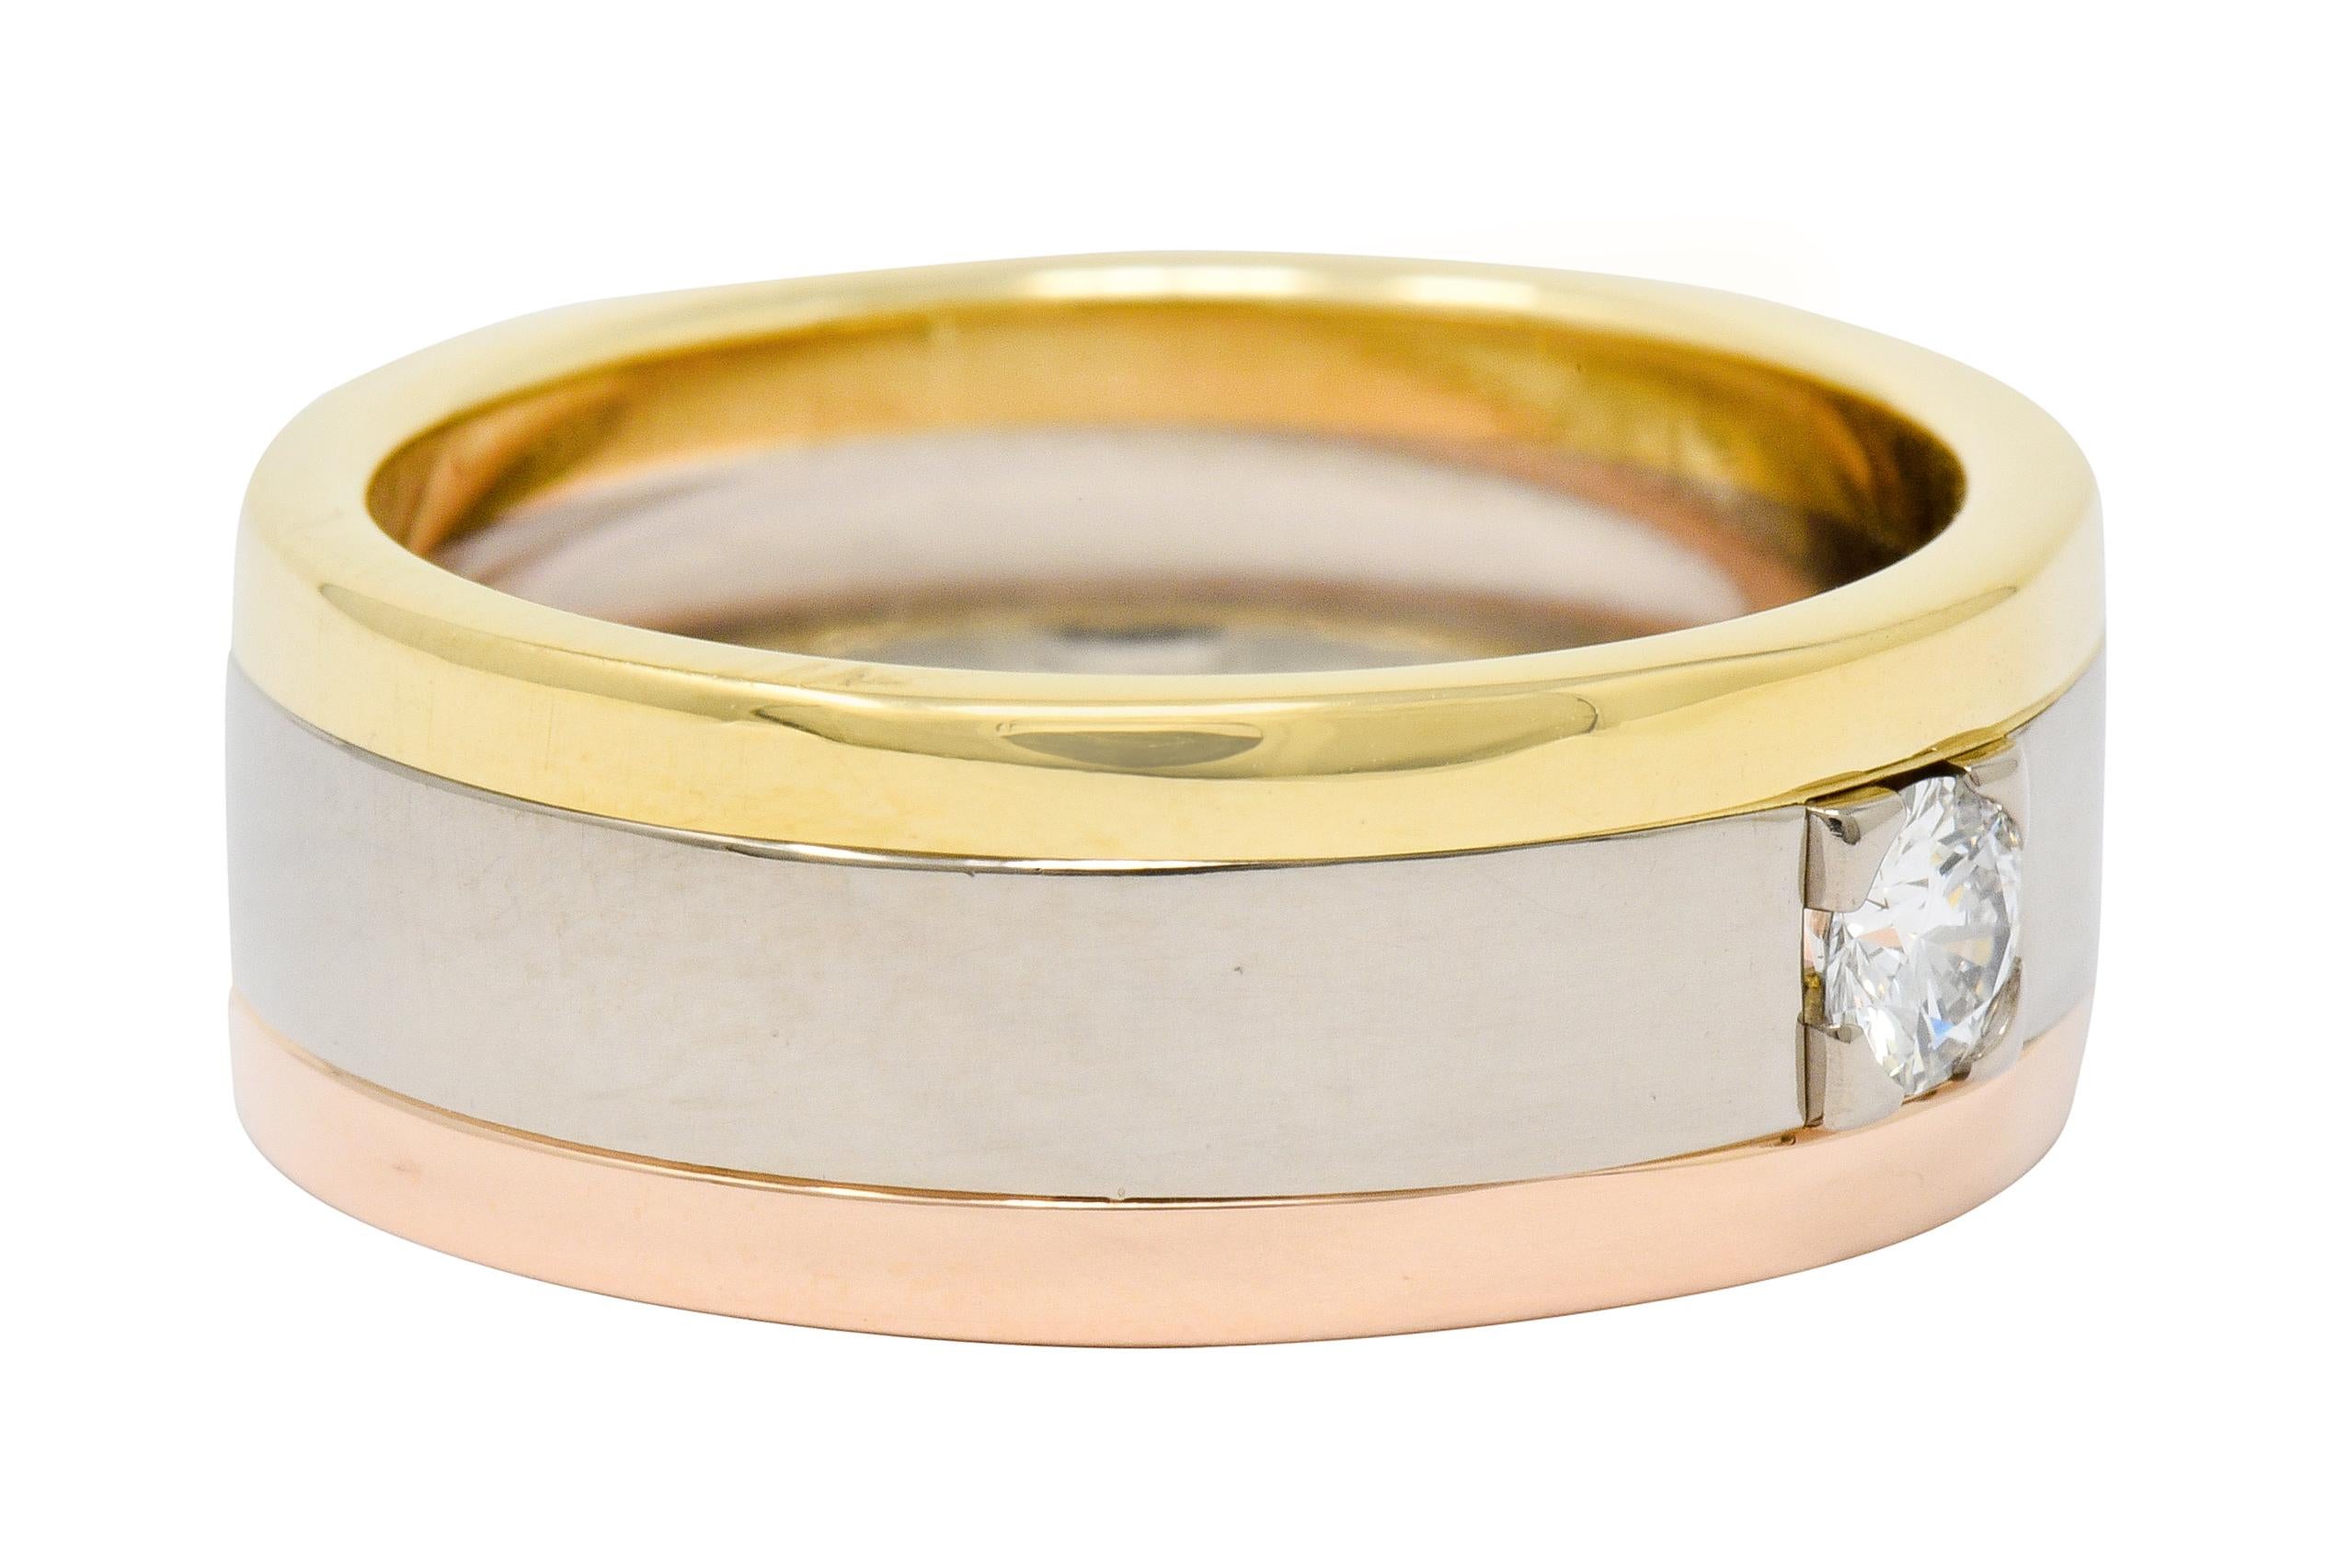 Wide band ring segmented three sections of white, yellow, and rose gold

Featuring a round brilliant cut diamond weighing approximately 0.20 carat, F/G color with VVS clarity

Set to front in a recessed square form head

From the prolific Trinity